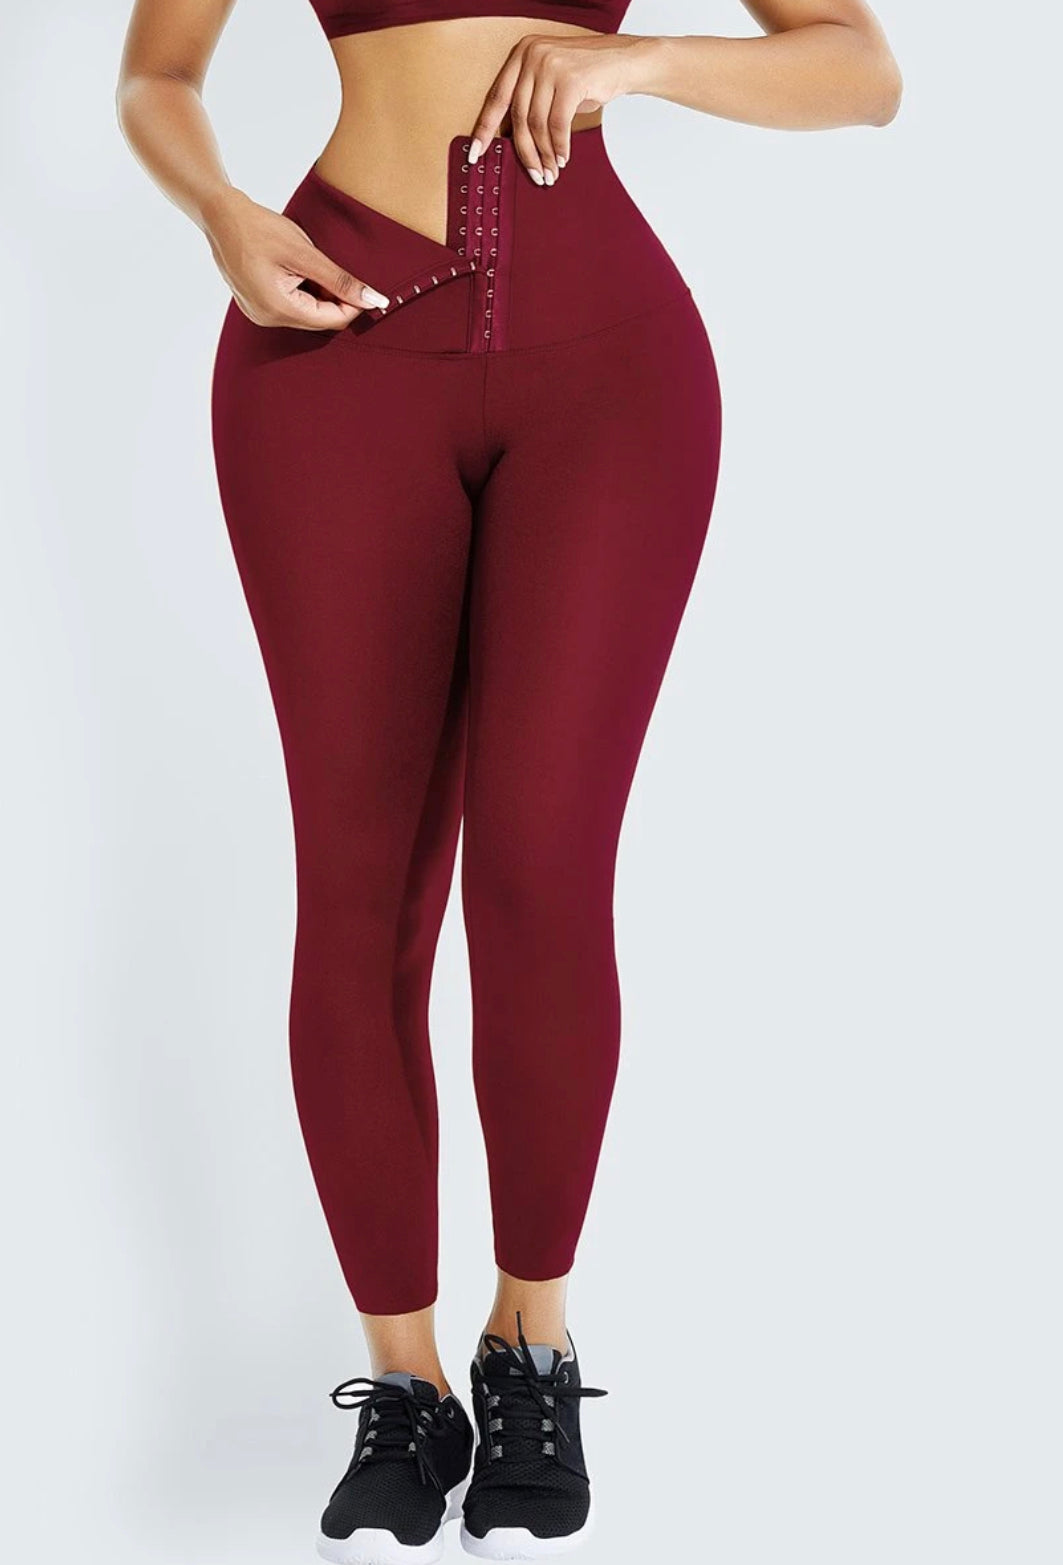 Maroon Compression High Waist Leggings, Casual Wear, Slim Fit at